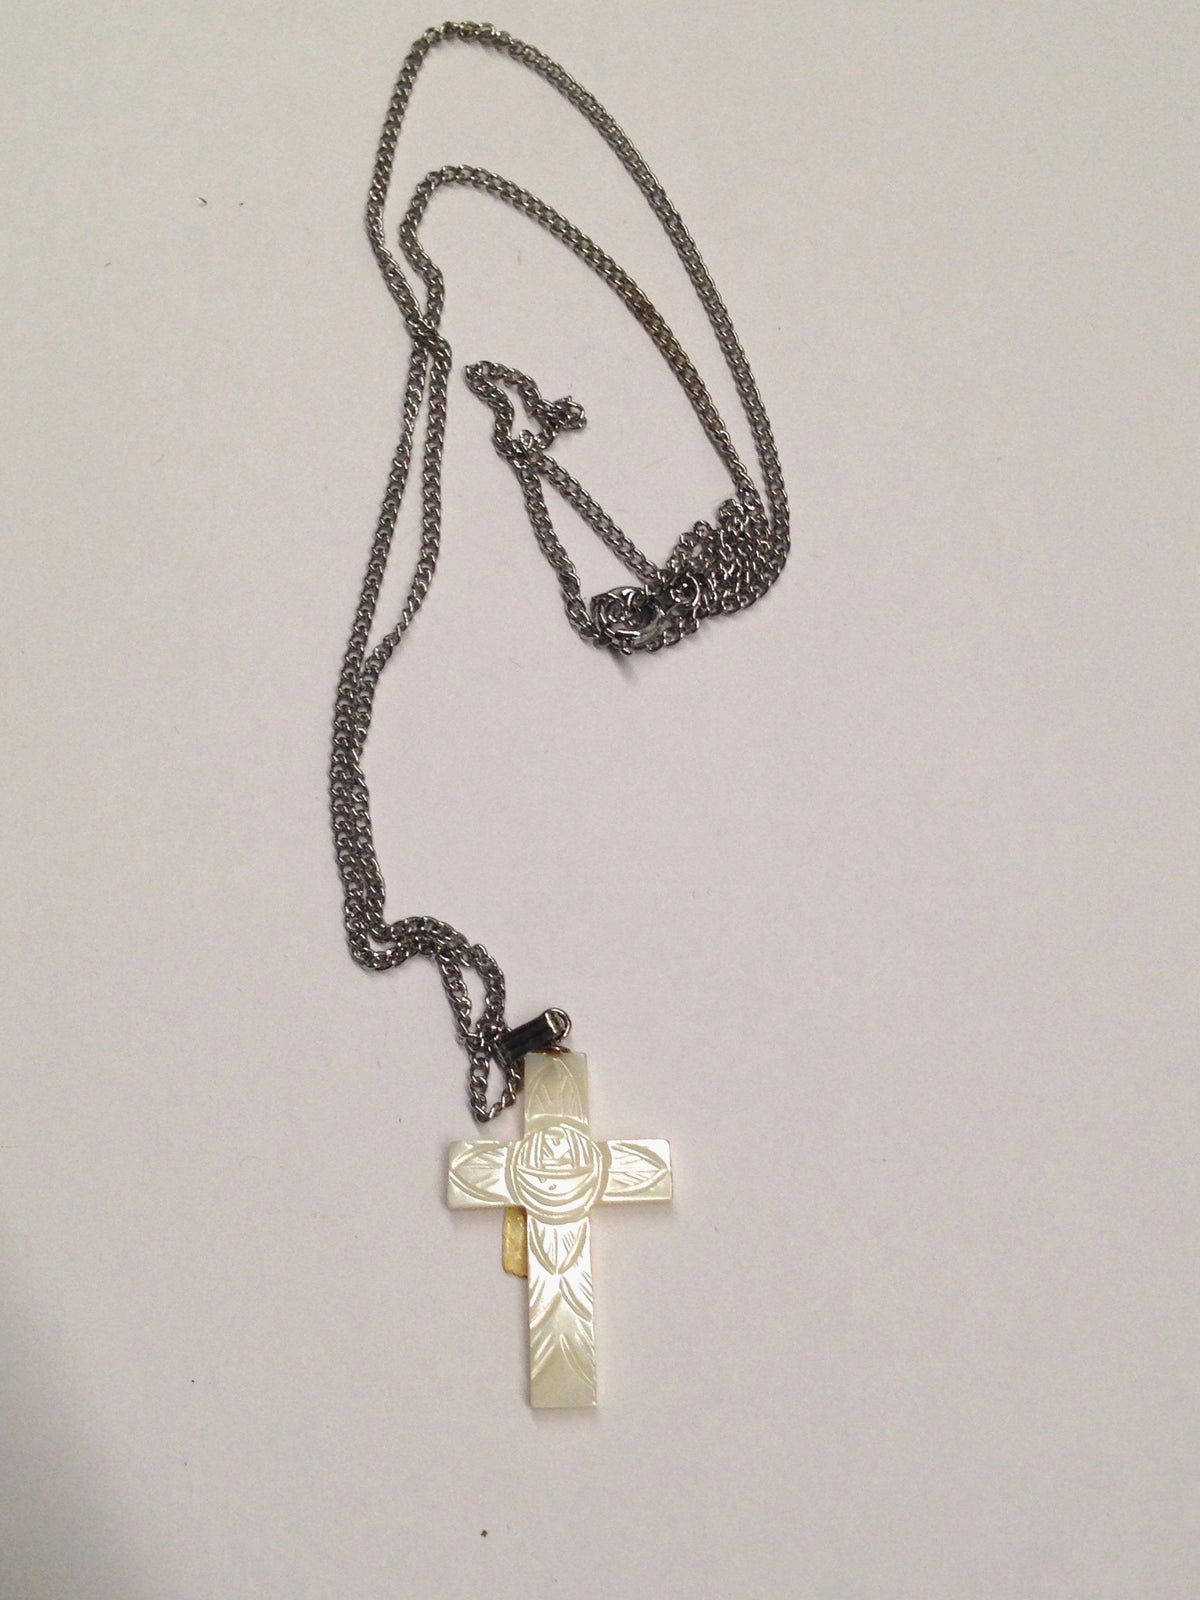 Vintage Imitation Mother Of Pearl Cross Necklace - Hers and His Treasures